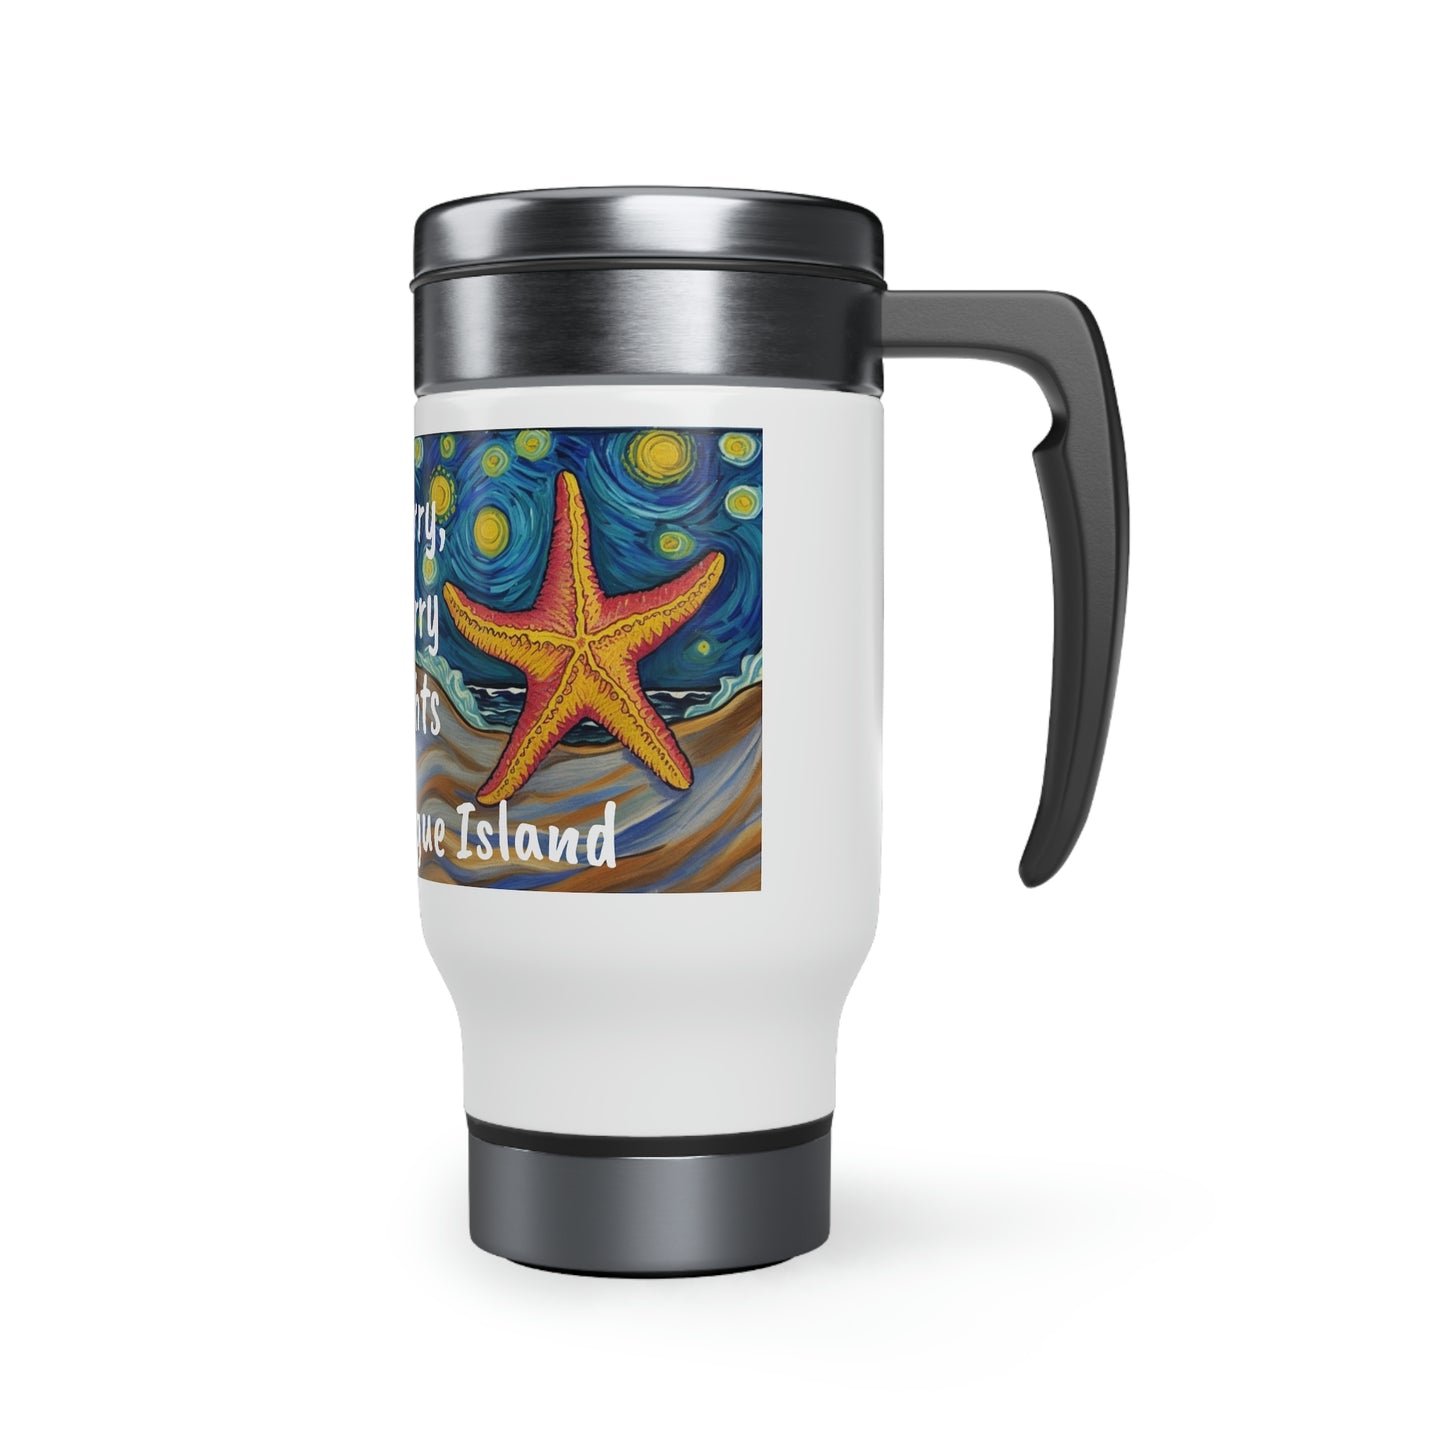 Starry, starry nights stainless steel travel mug with handle, 14oz